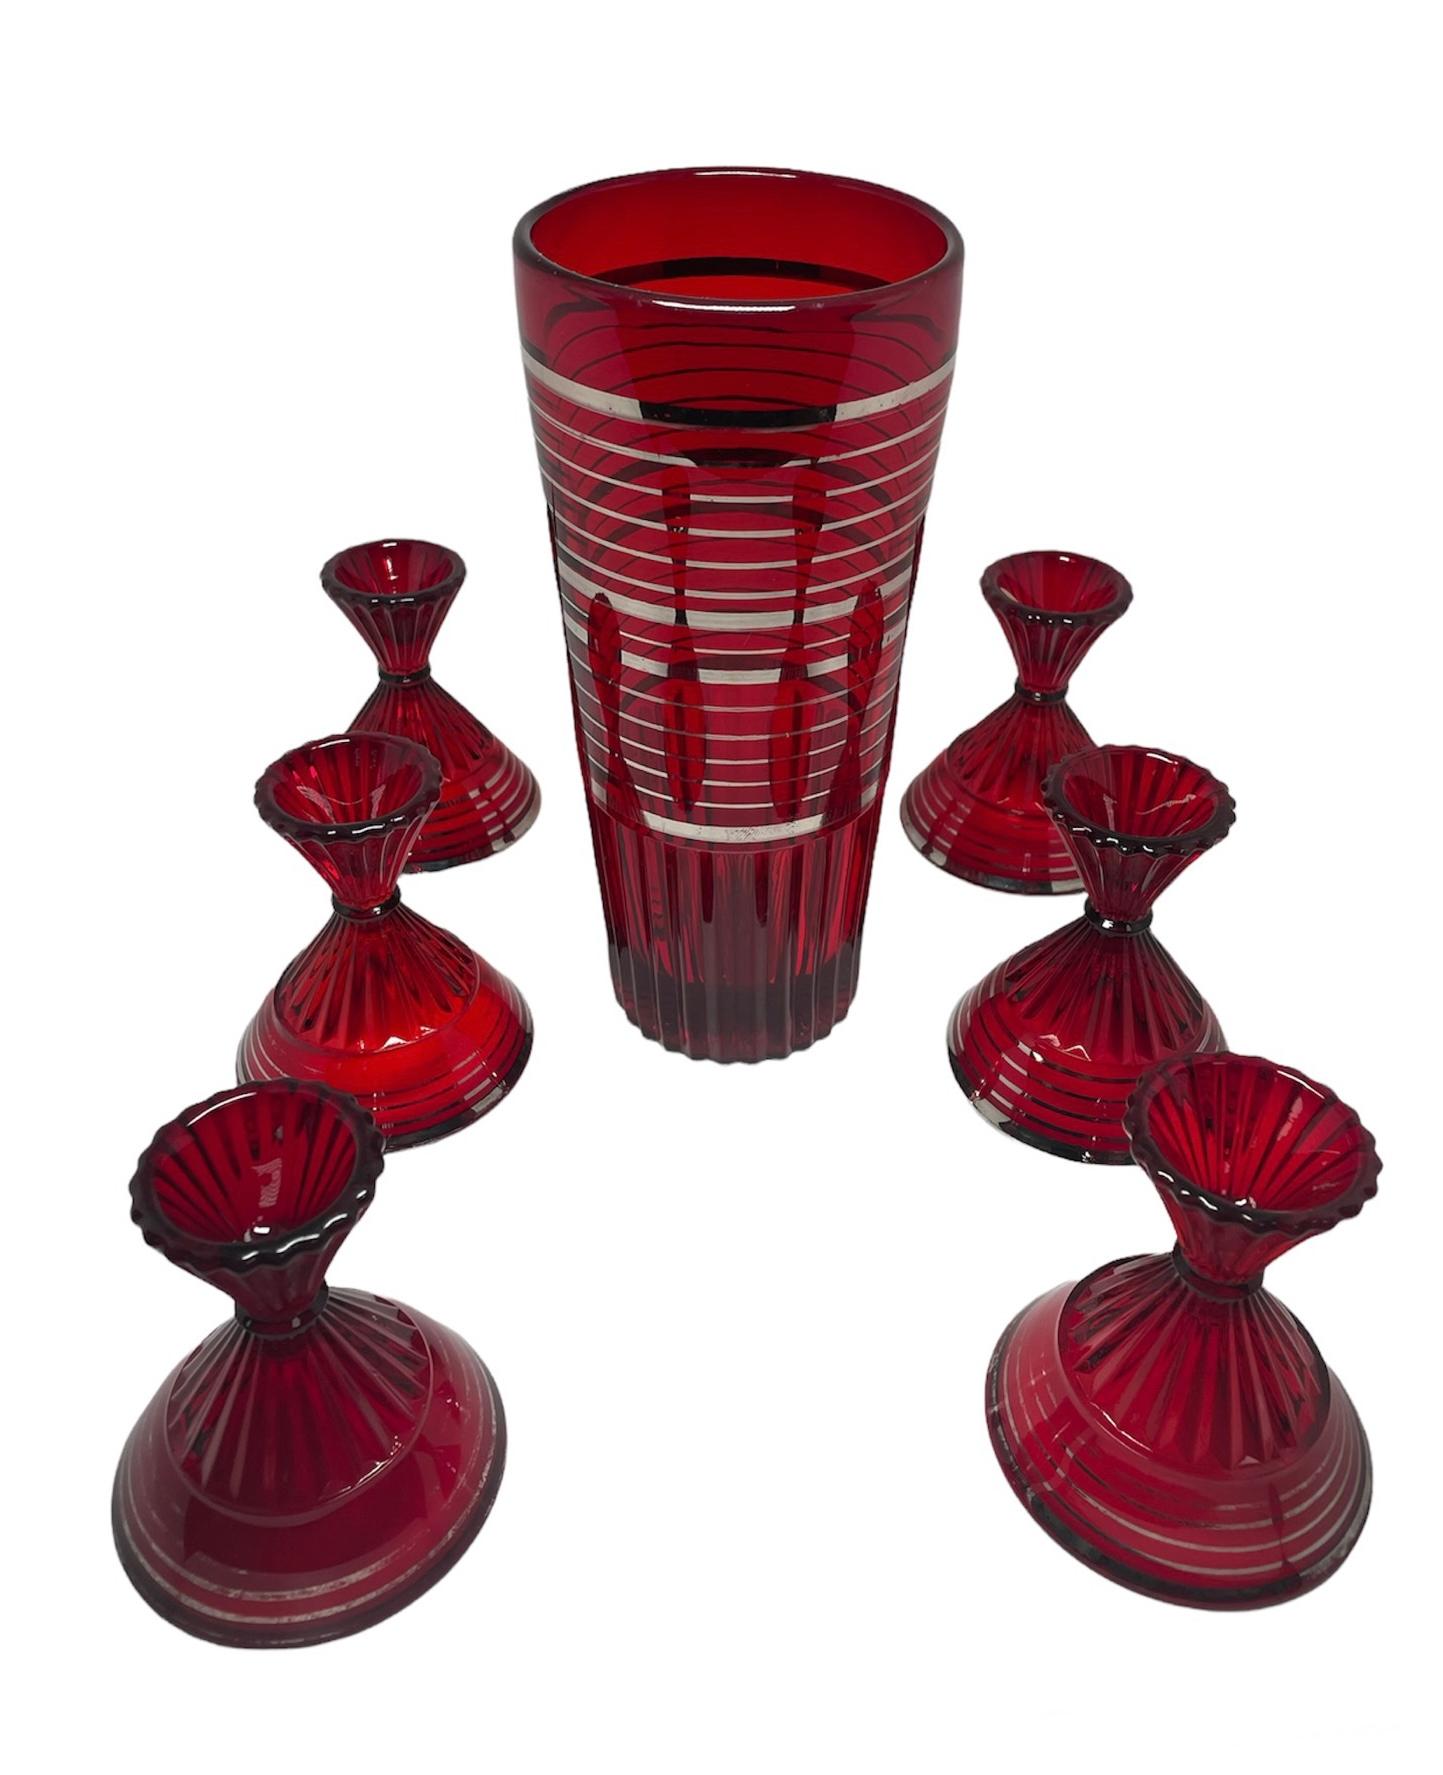 This is a set of a Ruby red glass and silver cocktail shaker and six Martini glasses. The shaker is shaped as a tall cylinder and decorated with silver bands. The decoration in the bottom part is ribbed giving the shaker an special look, The glasses